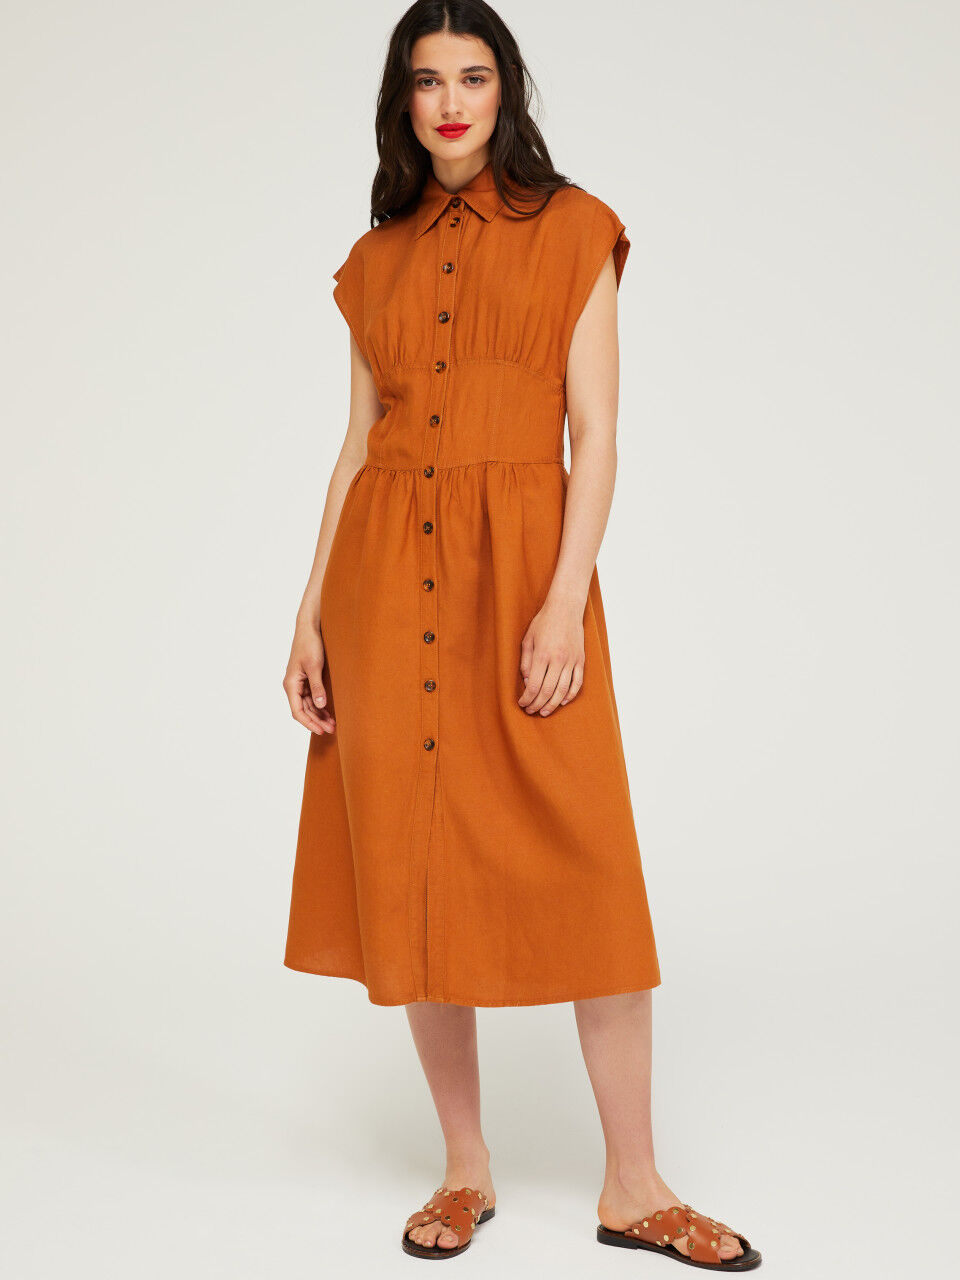 Women's Dresses New Collection 2021 | Sisley